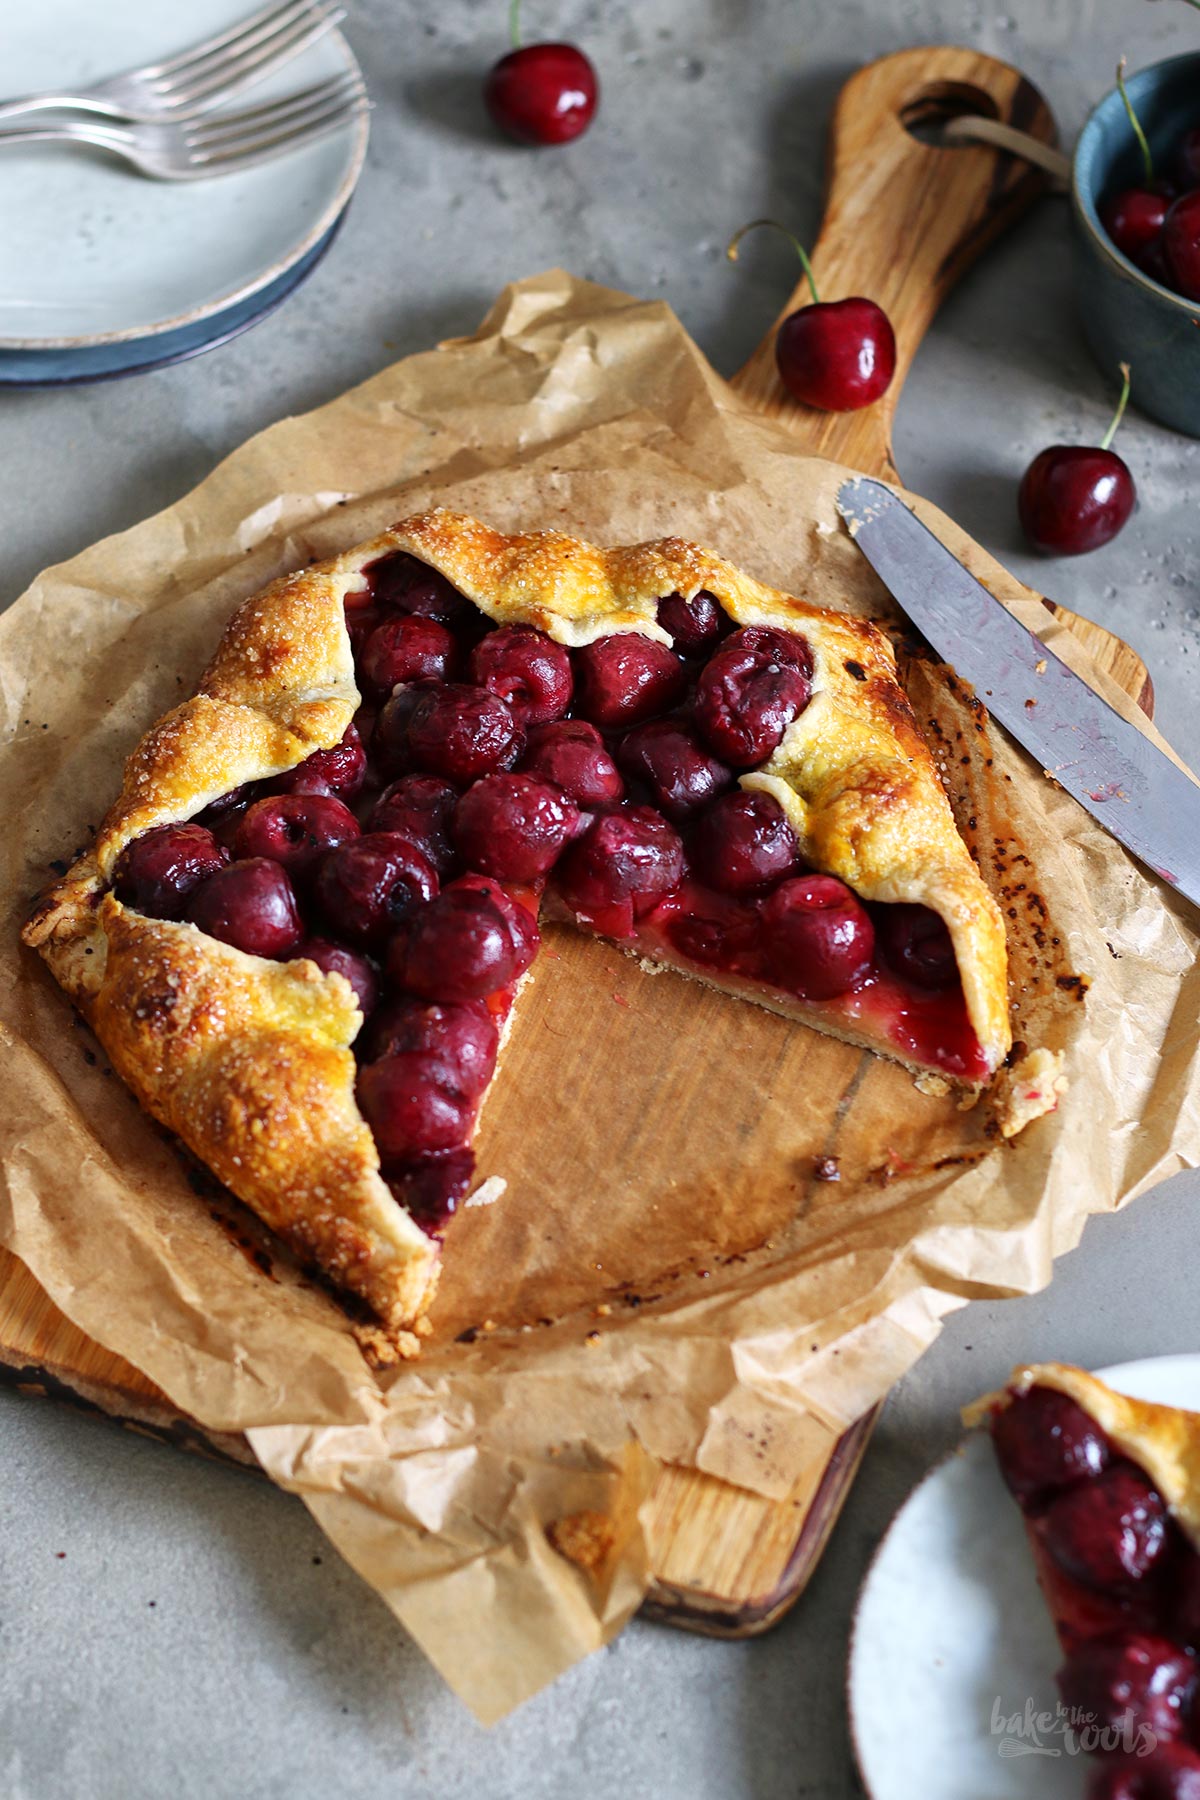 Cherry (Star) Galette | Bake to the roots